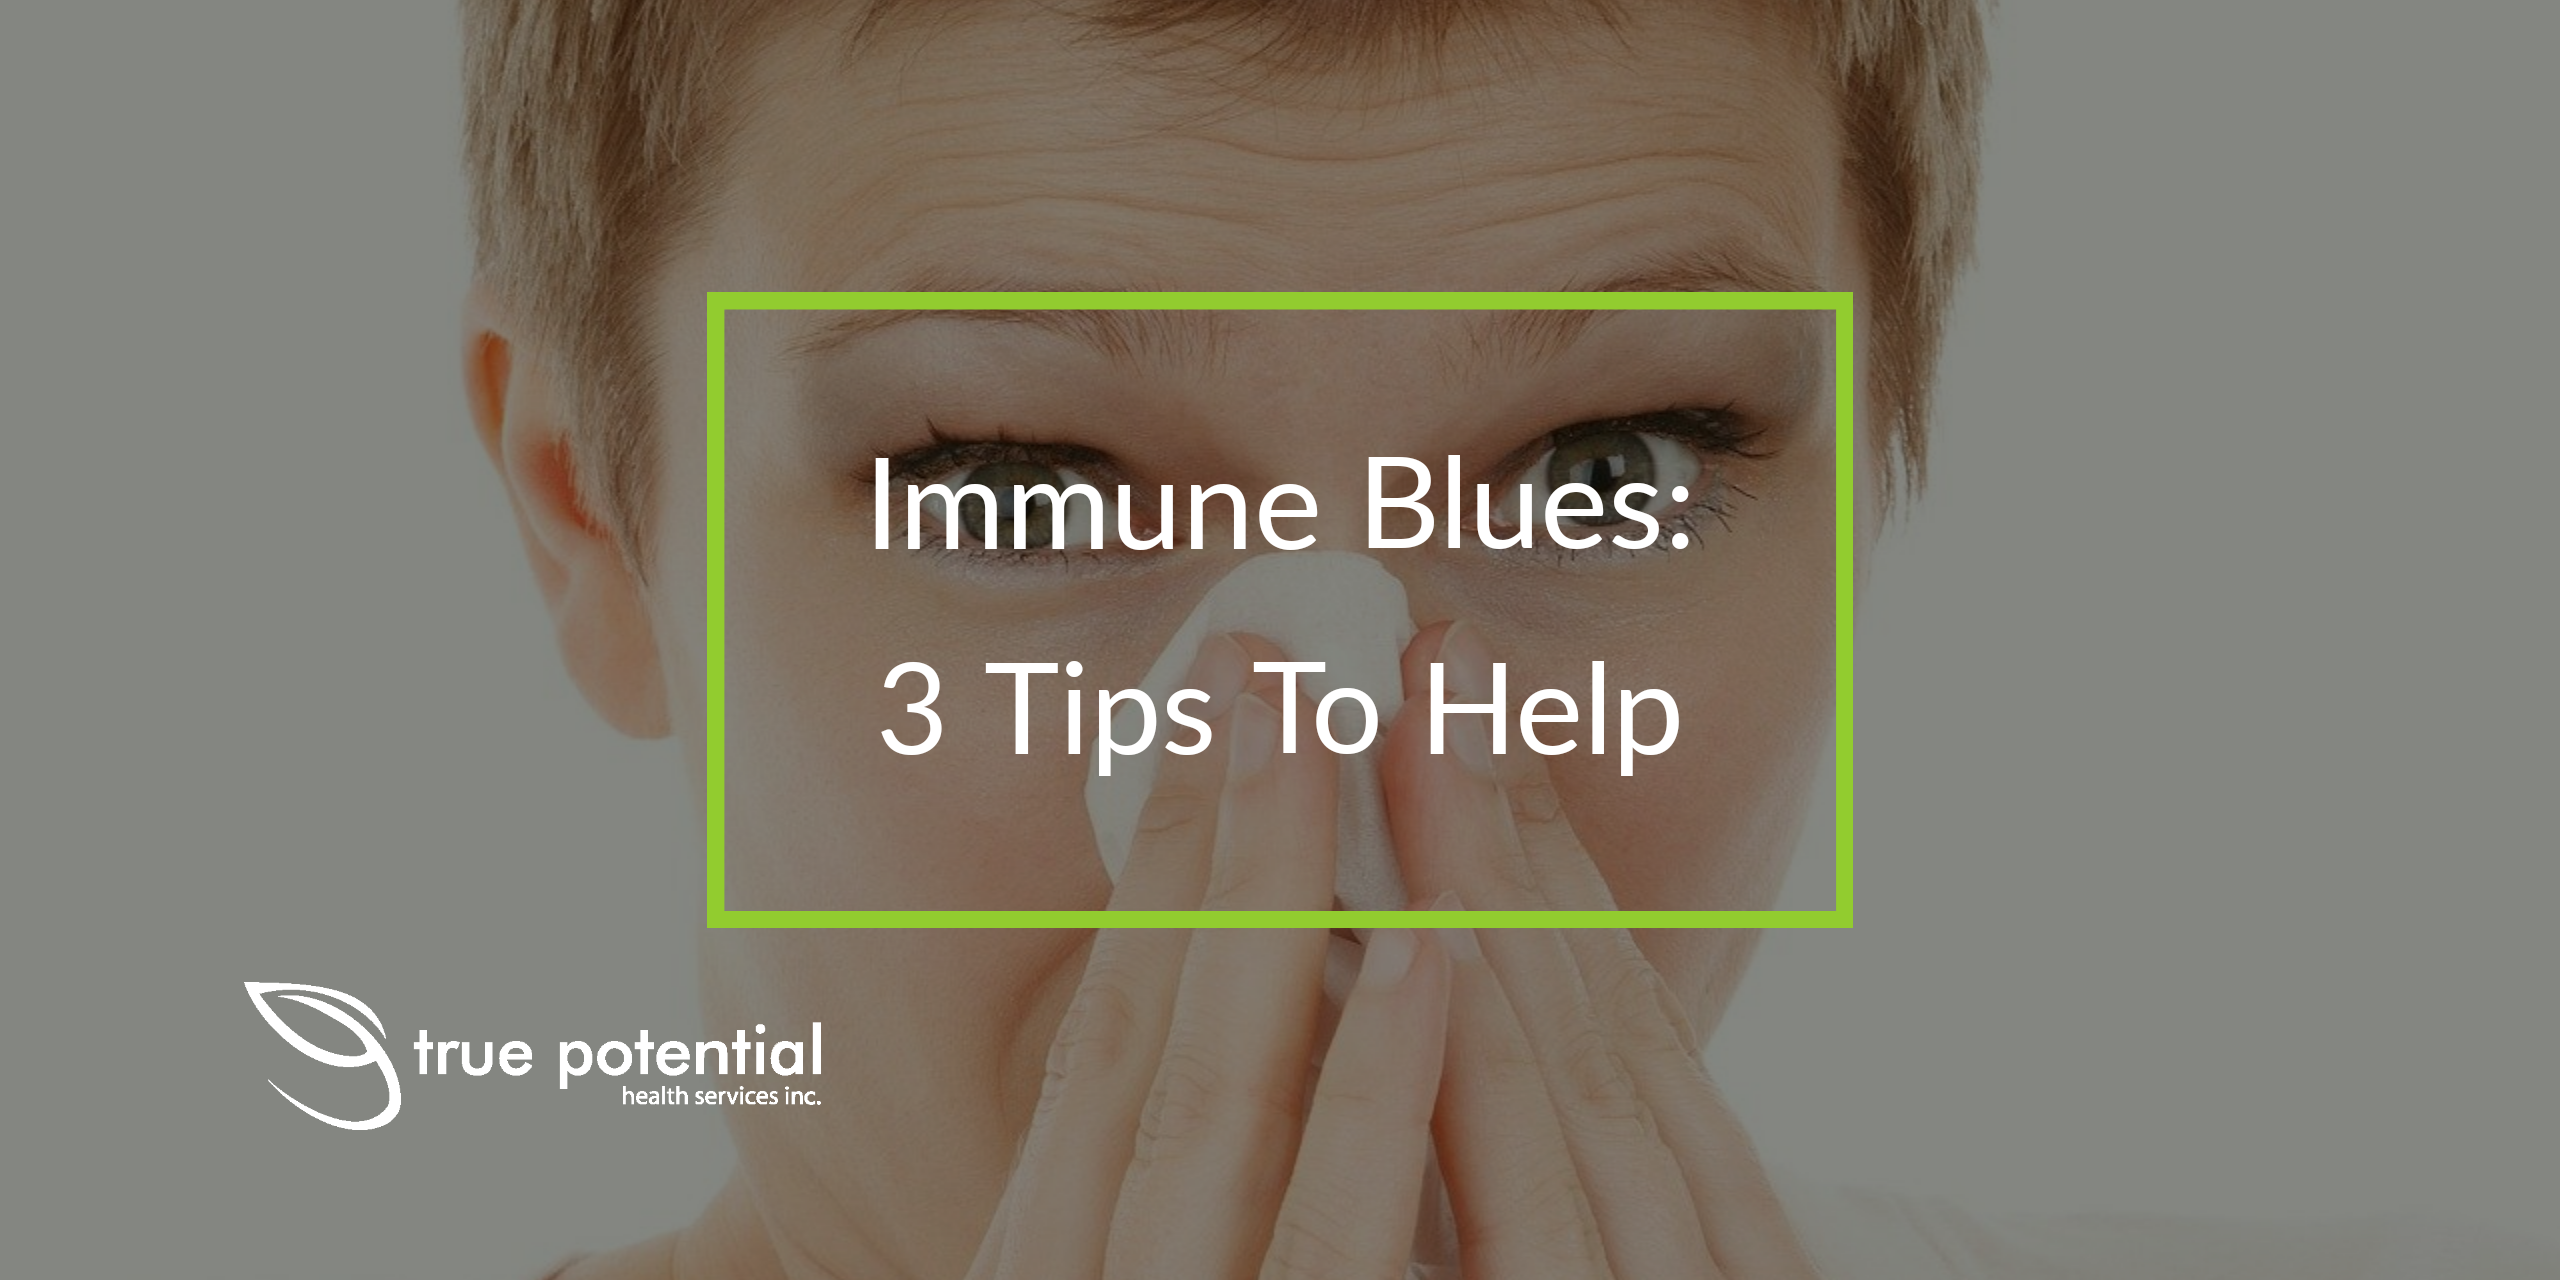 Immune blues: 3 tips to help